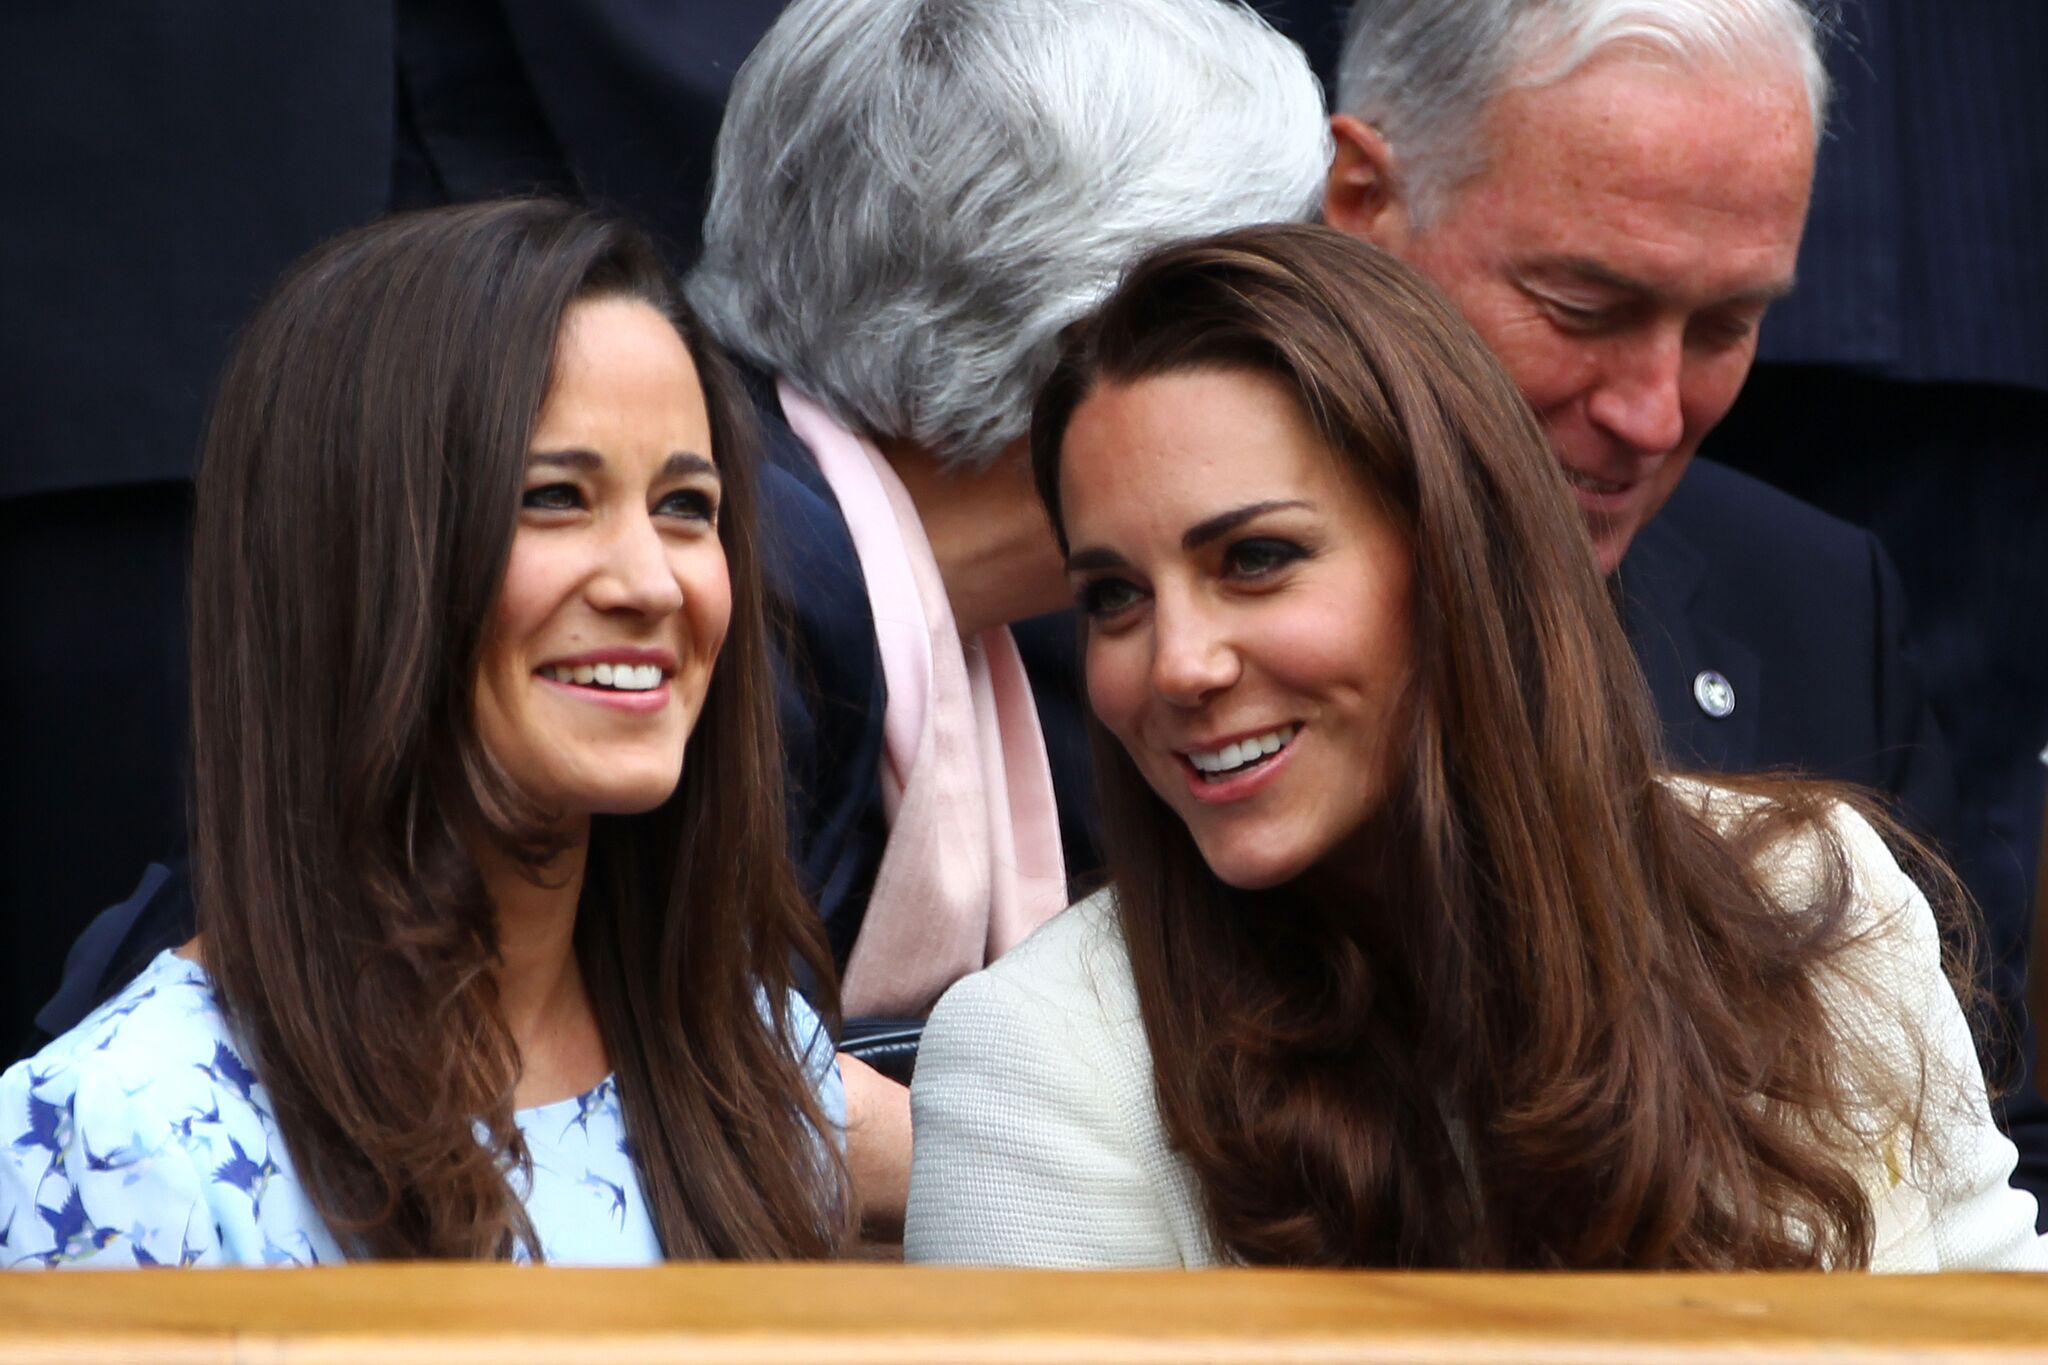 Pippa Middleton and Kate Middleton in the Royal Box at the Gentlemen's Singles | Getty Images